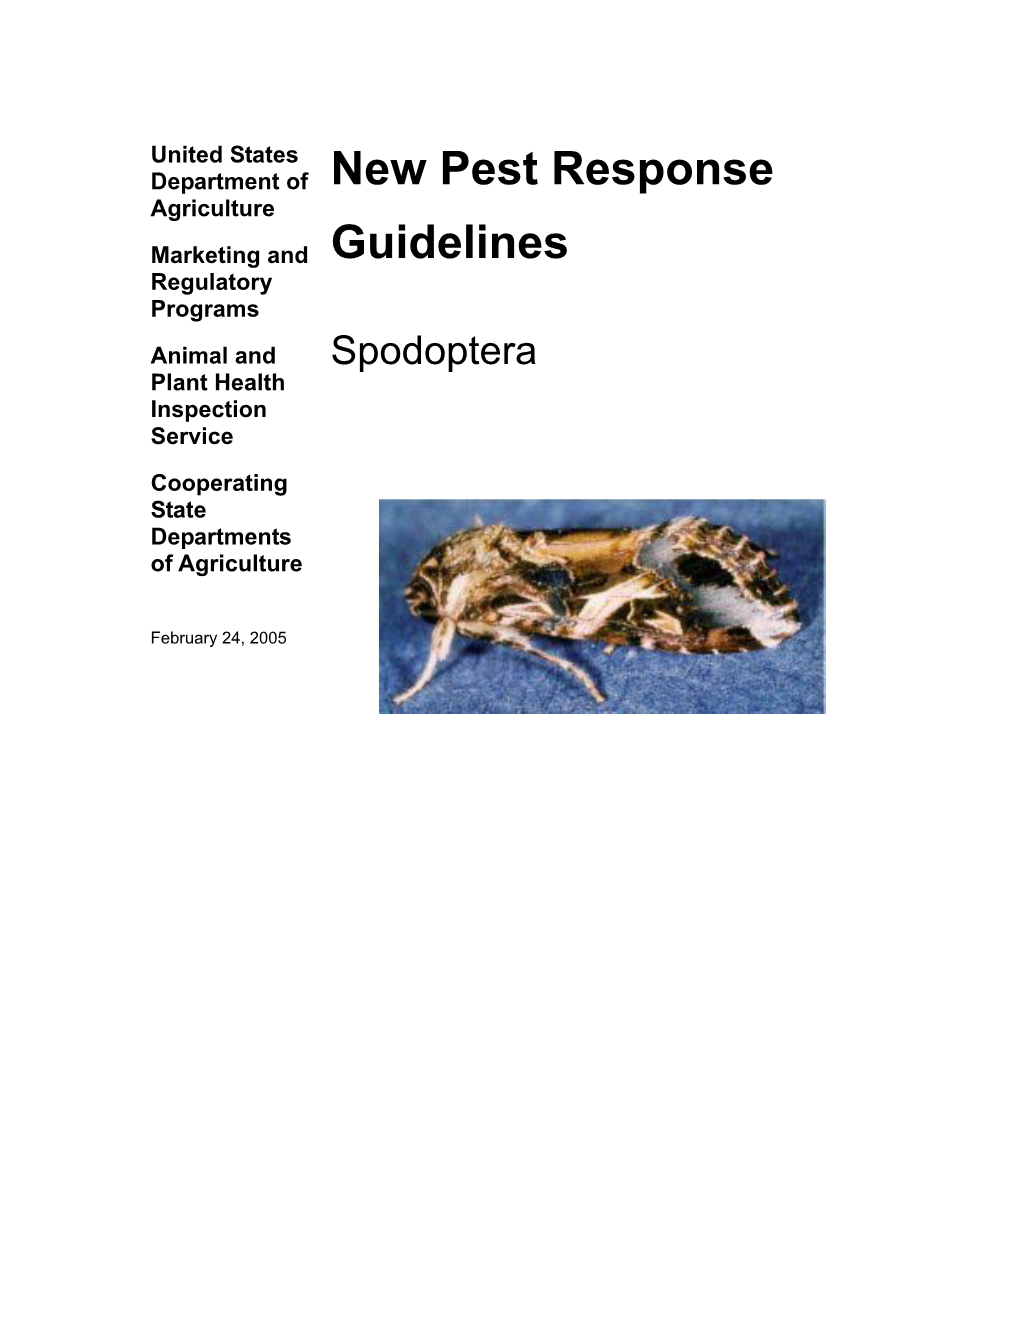 New Pest Response Guidelines